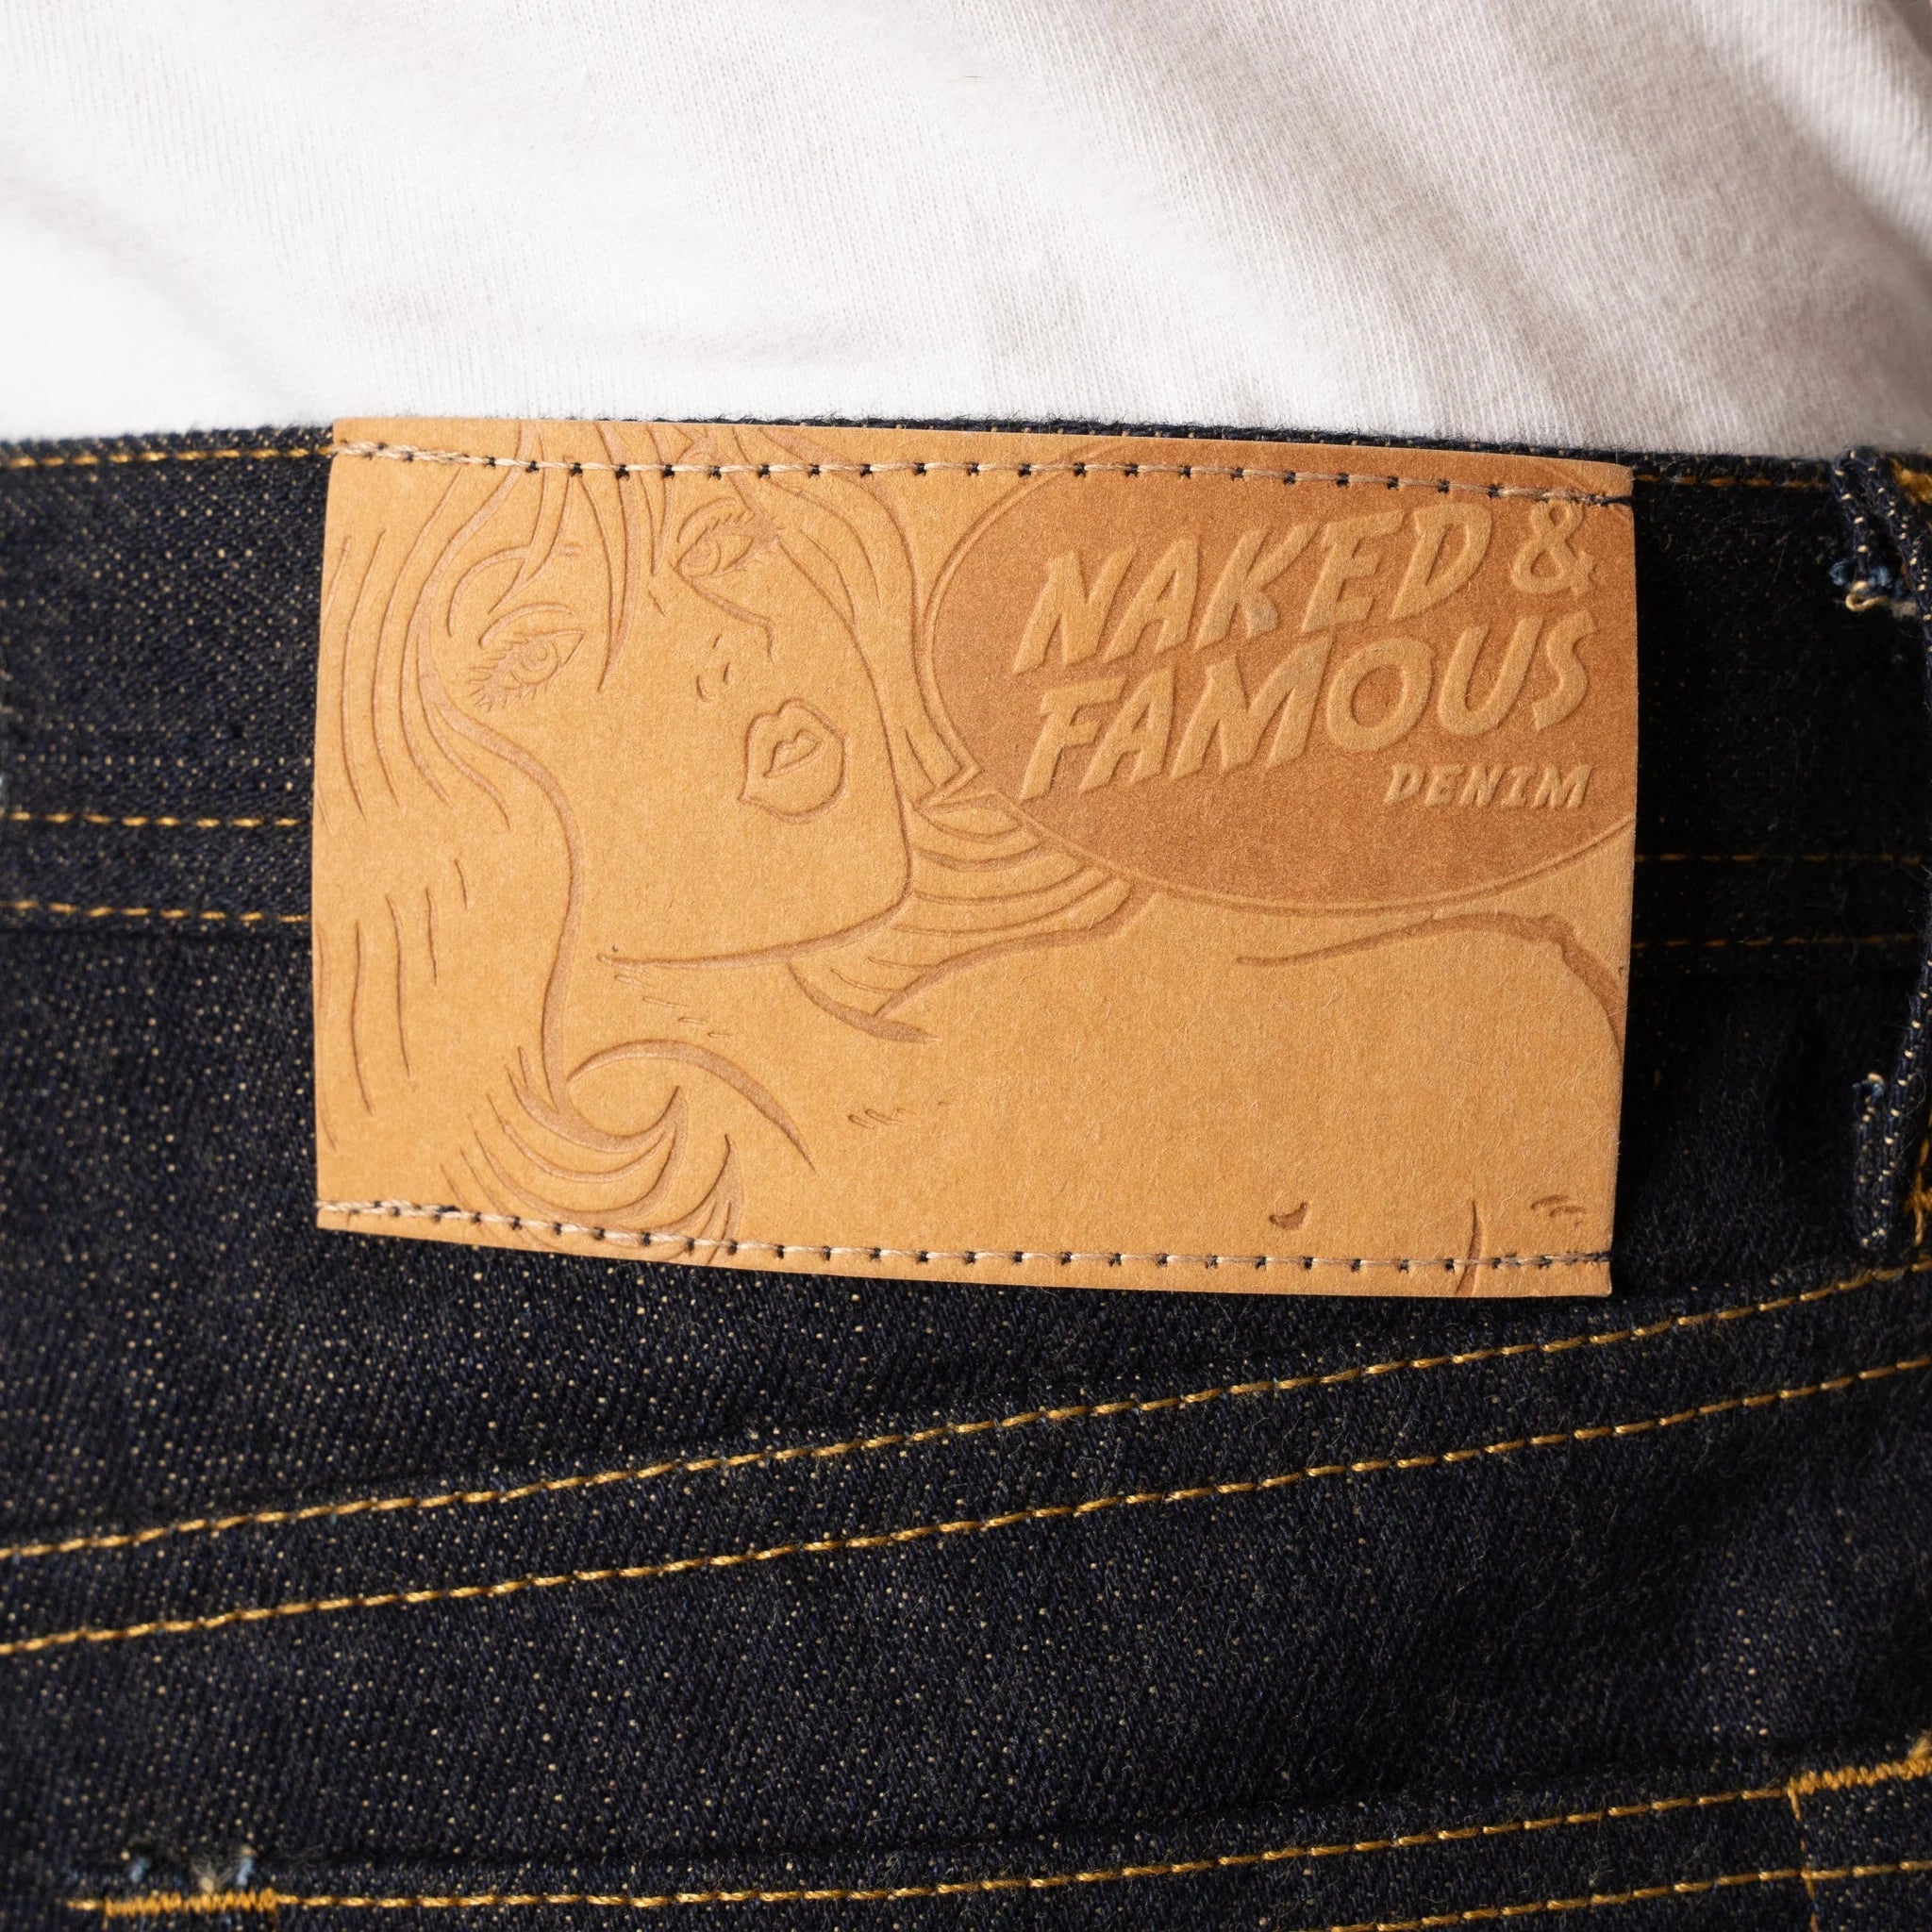 Naked &amp; Famous - Weired Guy - Pagoda 15 oz - Vintage Jeans